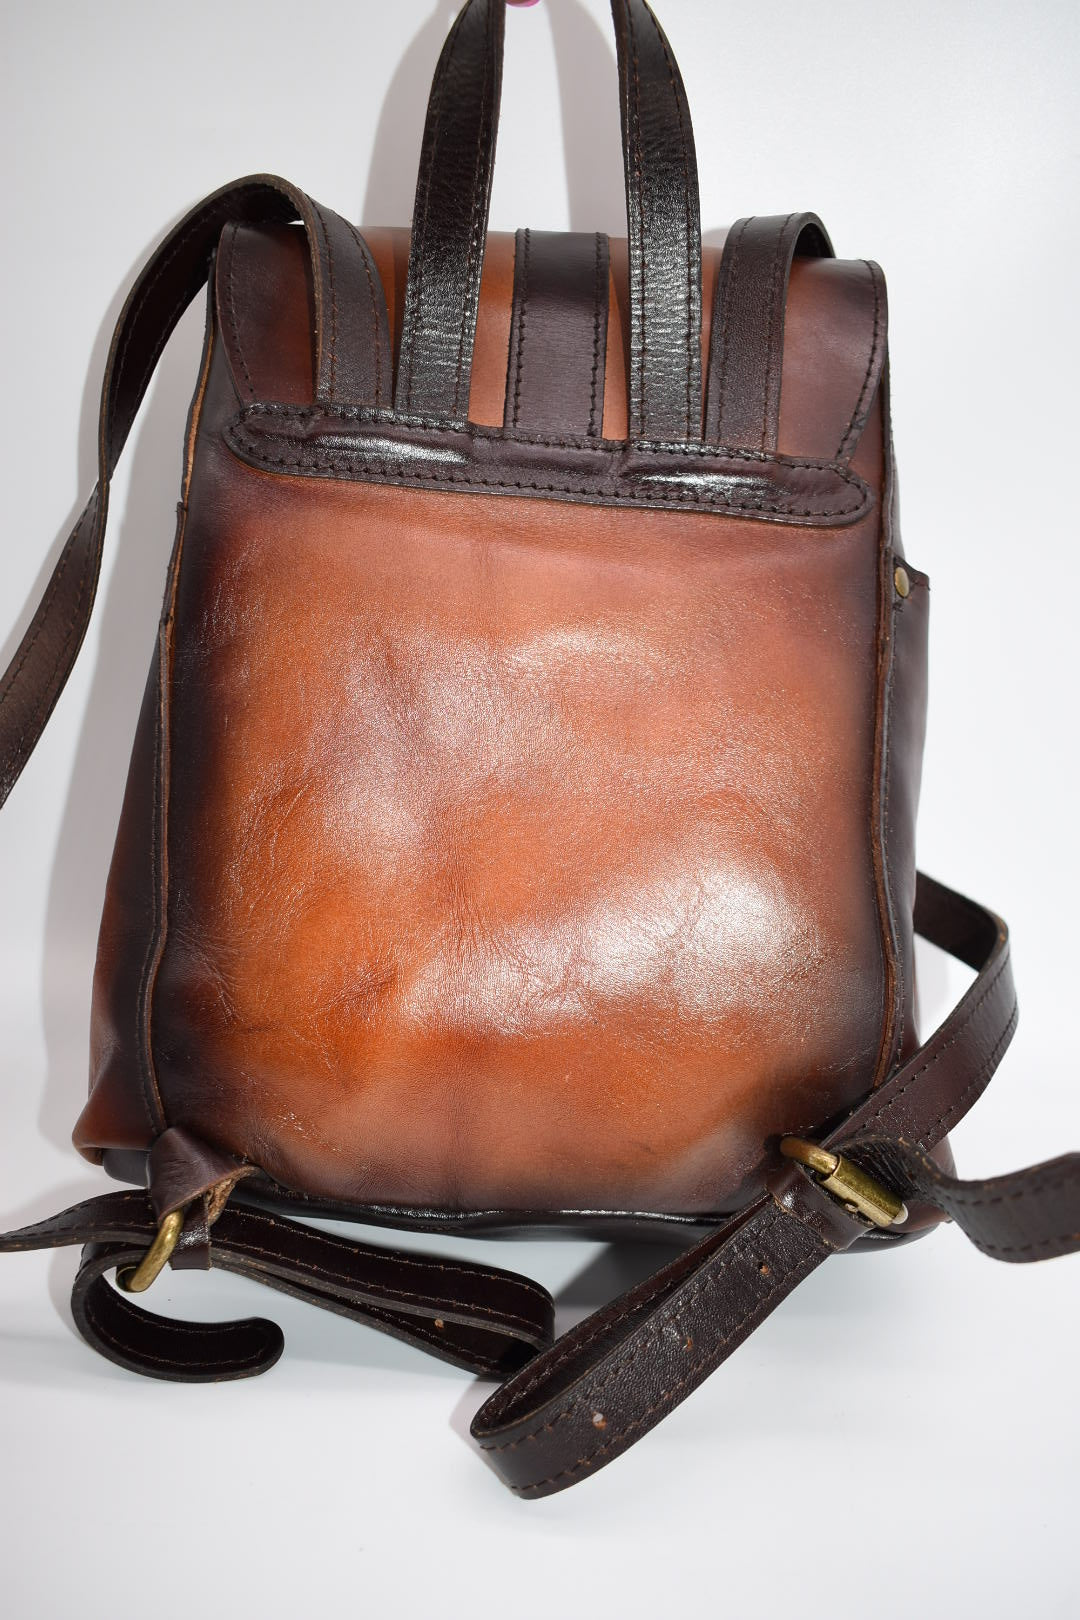 Patricia Nash Aberdeen Backpack in Stained Veg Tan